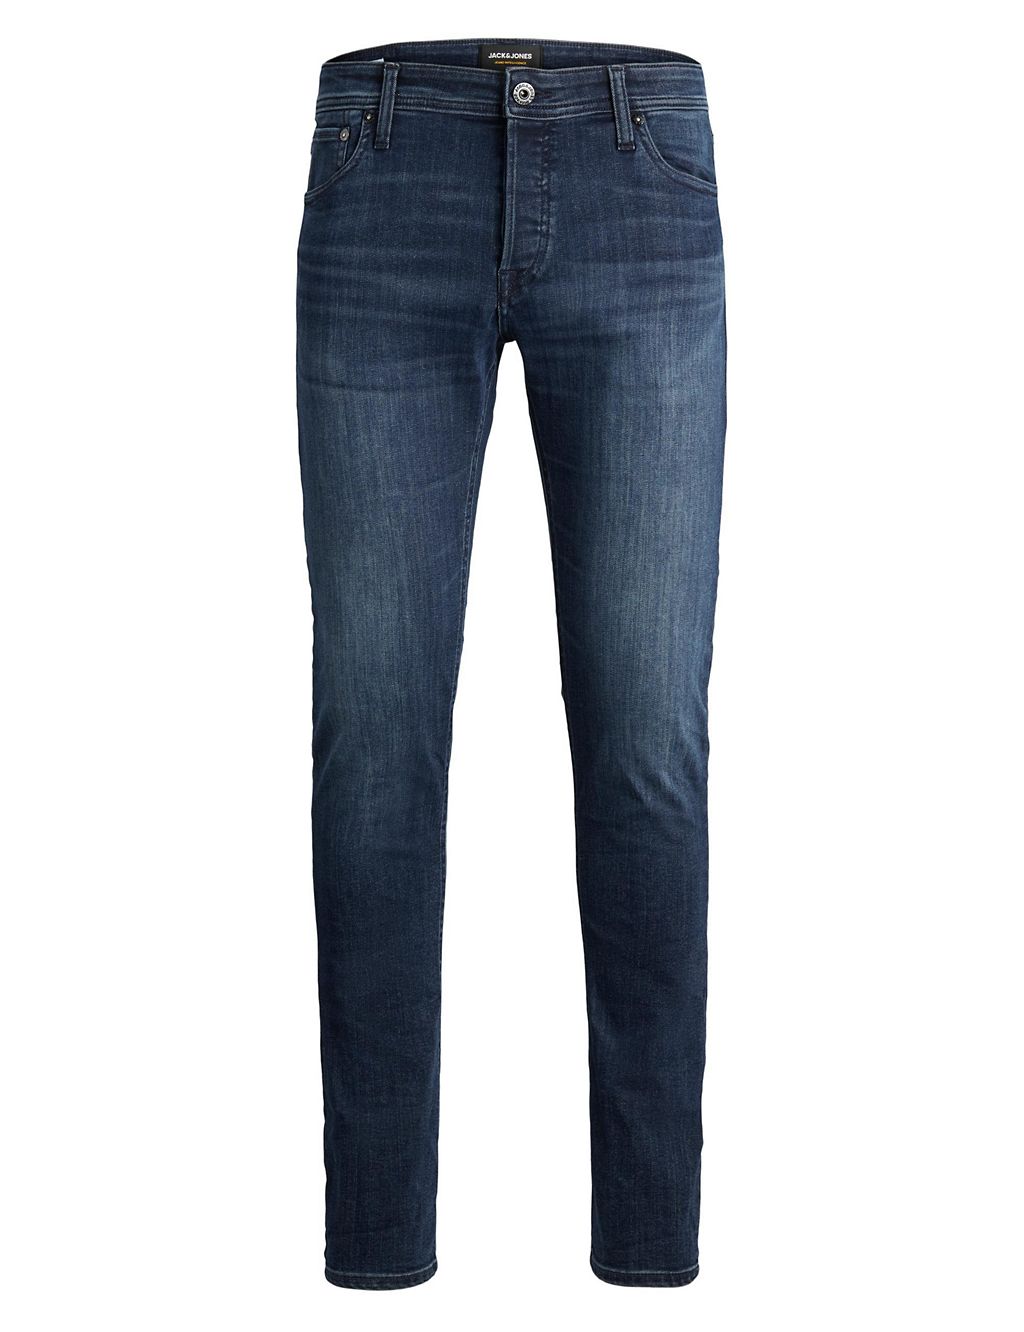 Slim Fit Stretch Jeans 1 of 8